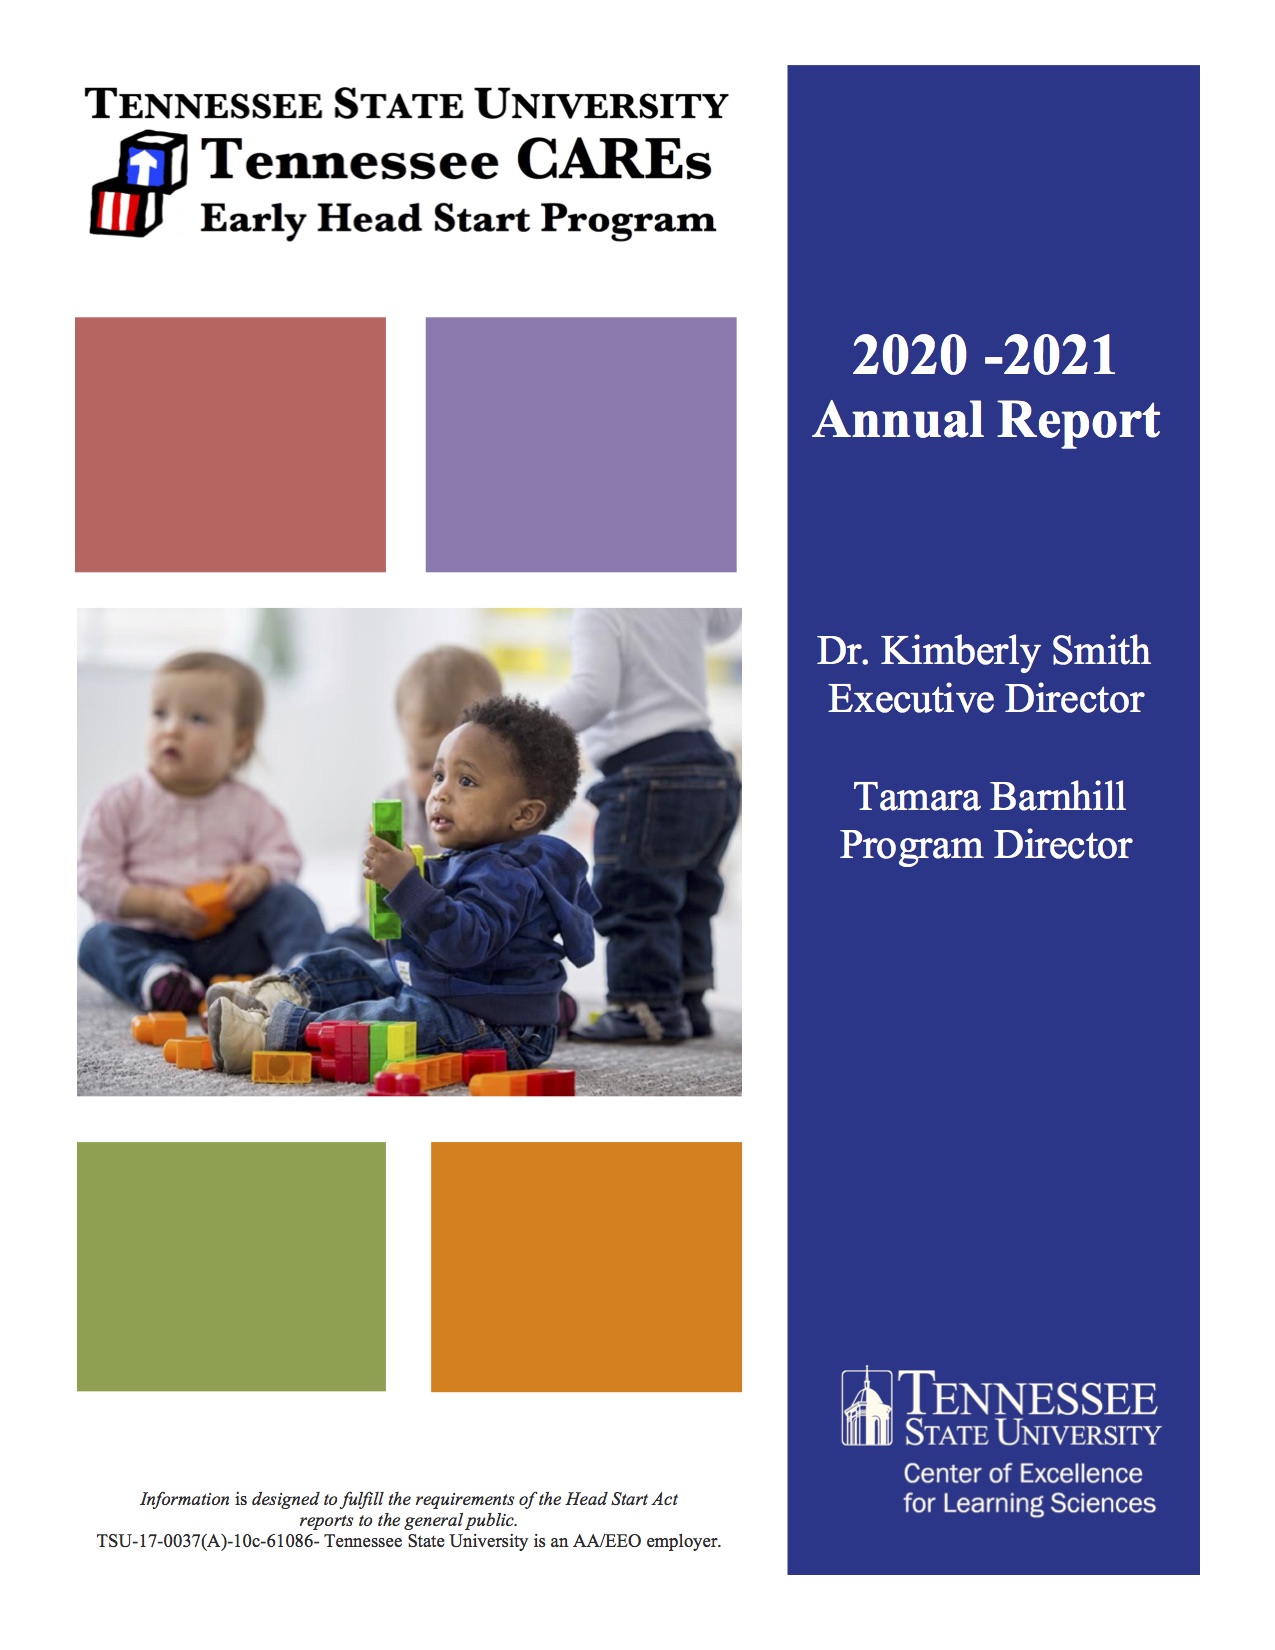 TN CARES 2021 annual report